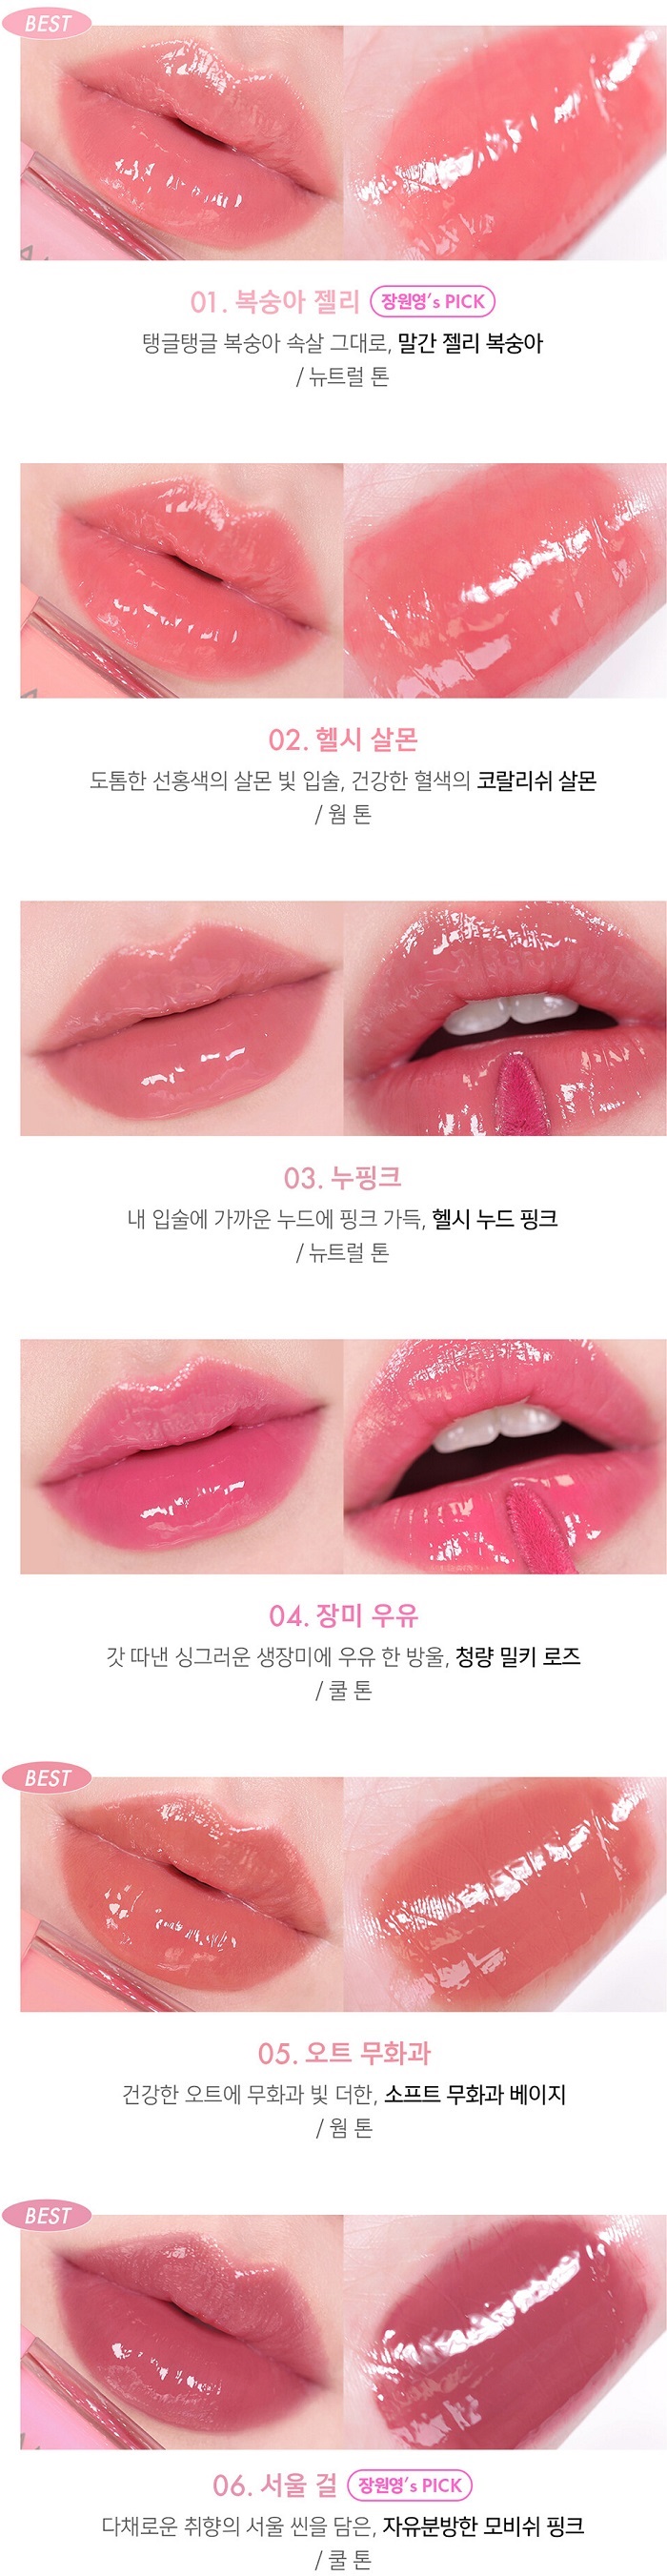 AMUSE Jel Fit Tint Peach Jelly Healthy Salmon Nu Pink Rose Milk Oat Fig Seoul Girl